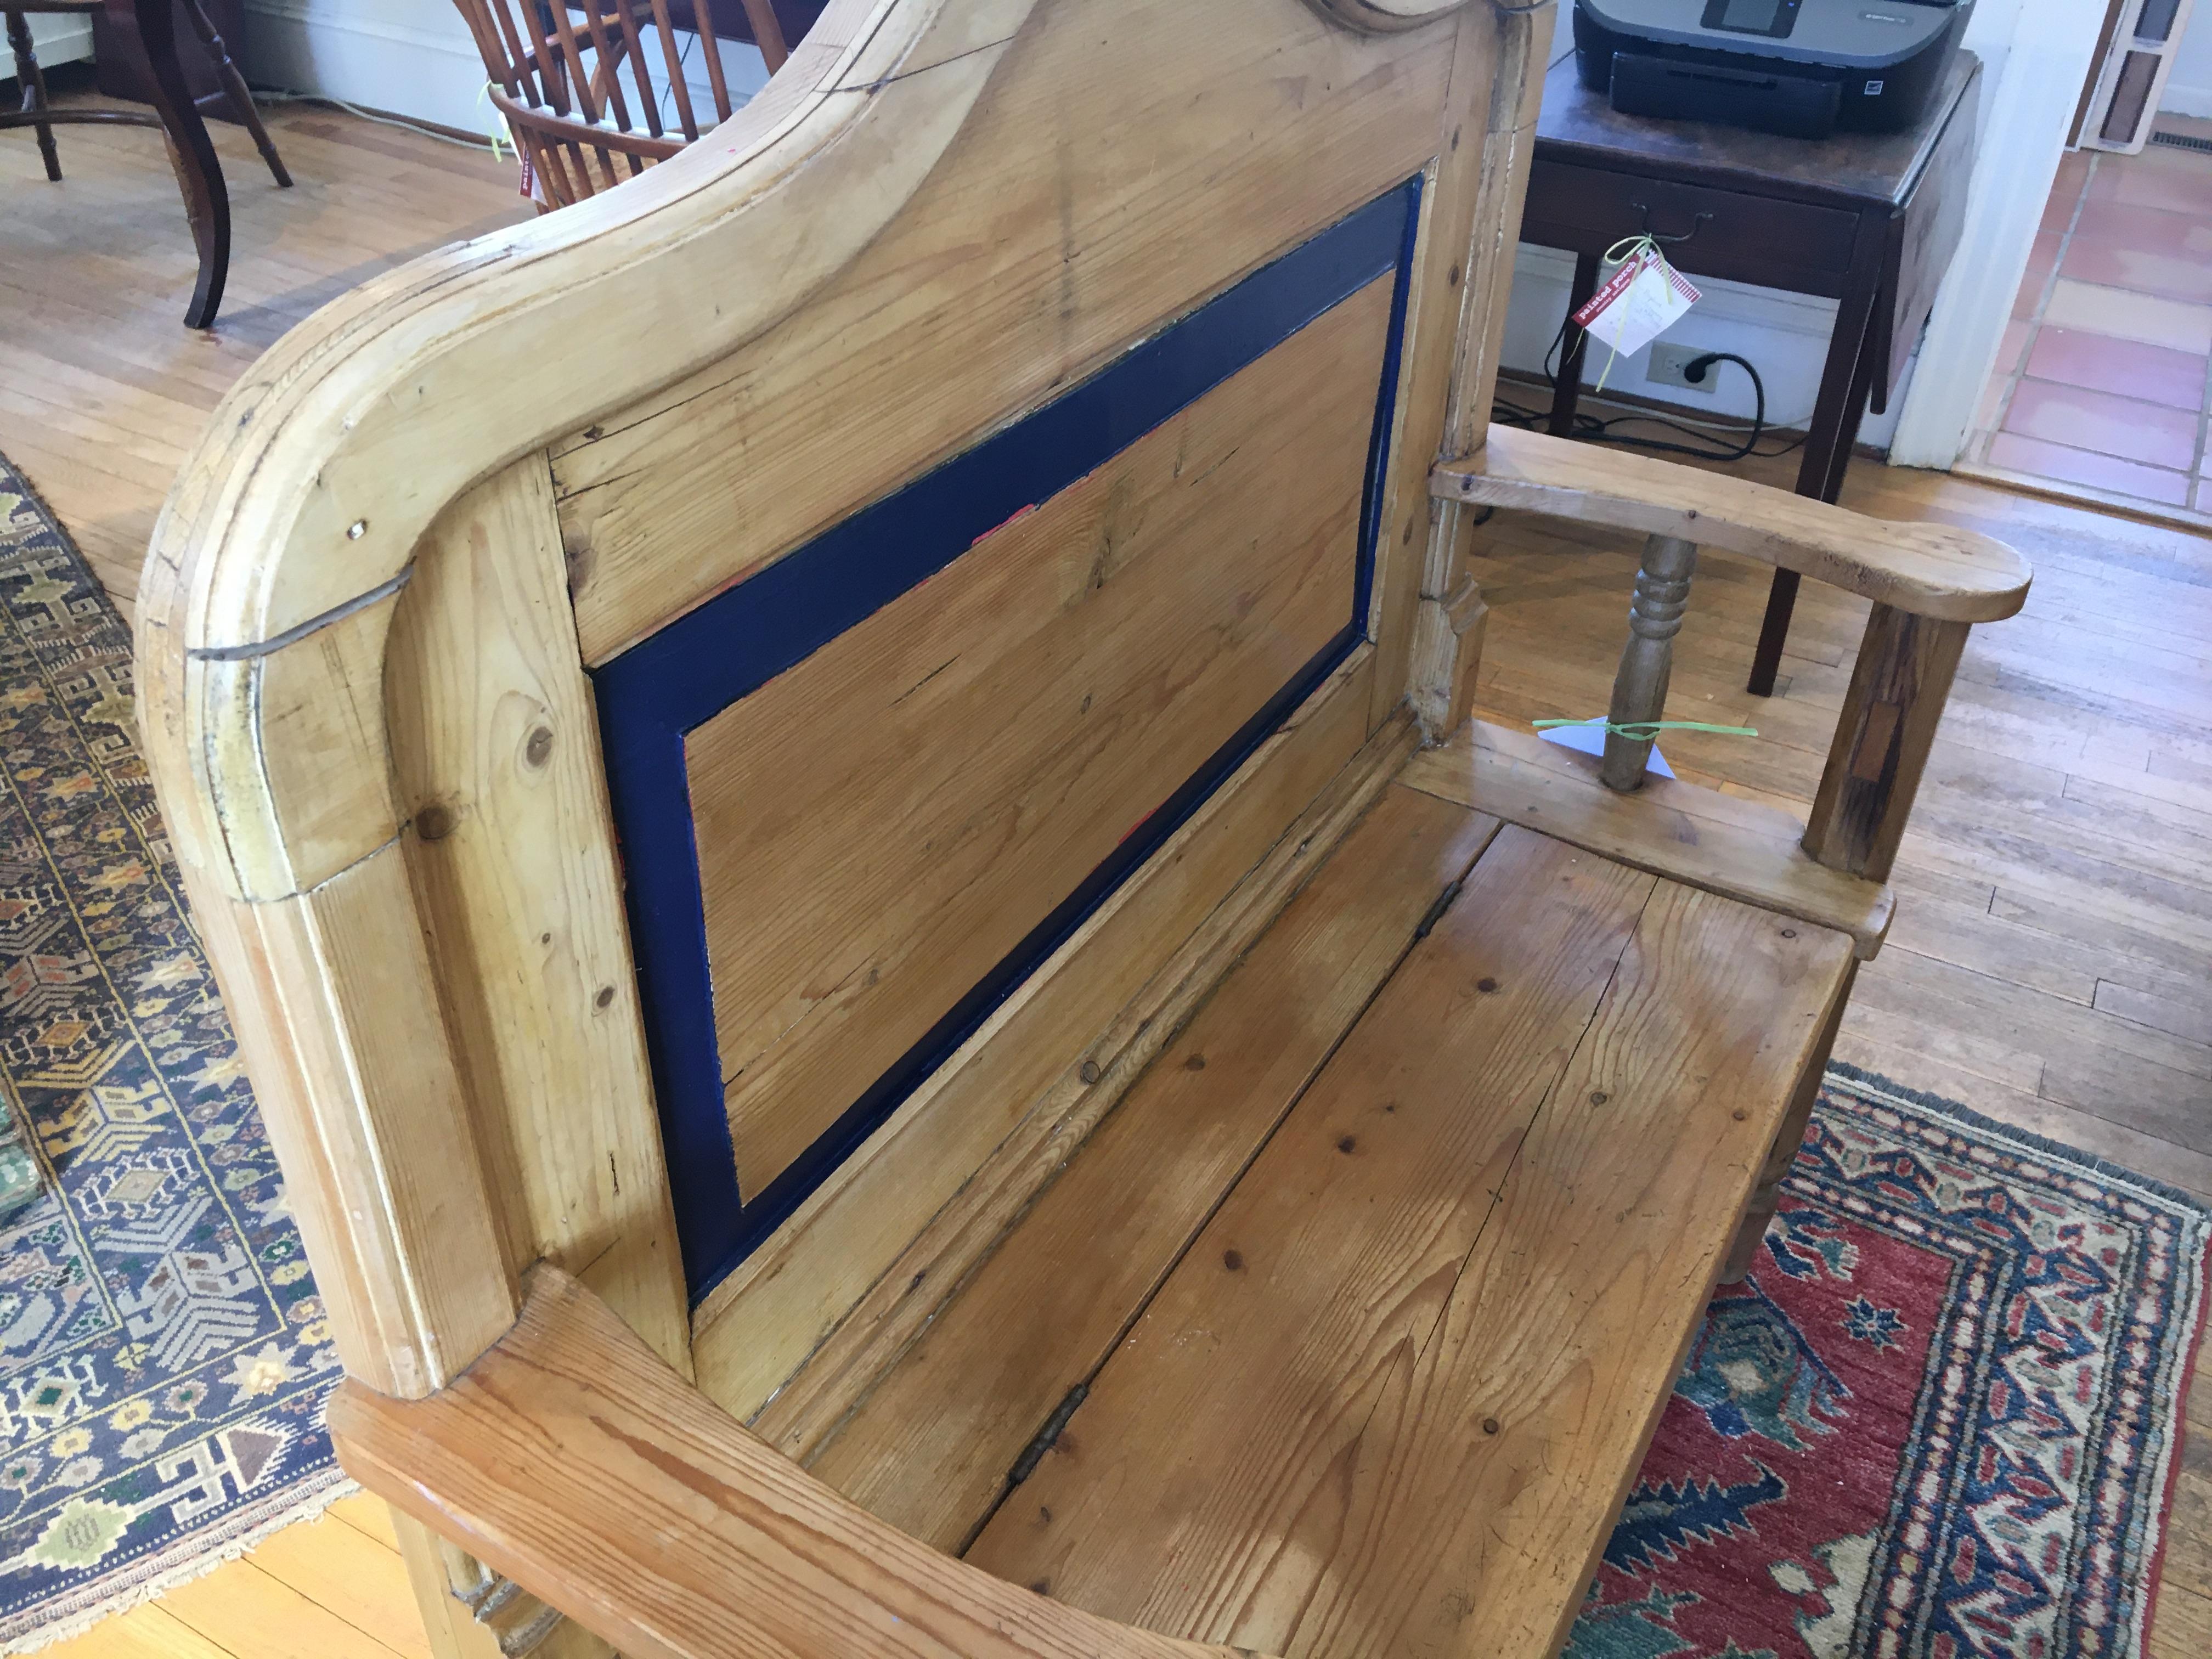 We love Irish pine pieces and this sweet bench has wonderful dimensions and a blue paint accent on the base and back. This would be perfect in a hallway or entrance to take off your boots. The arms and back have wonderful lines.